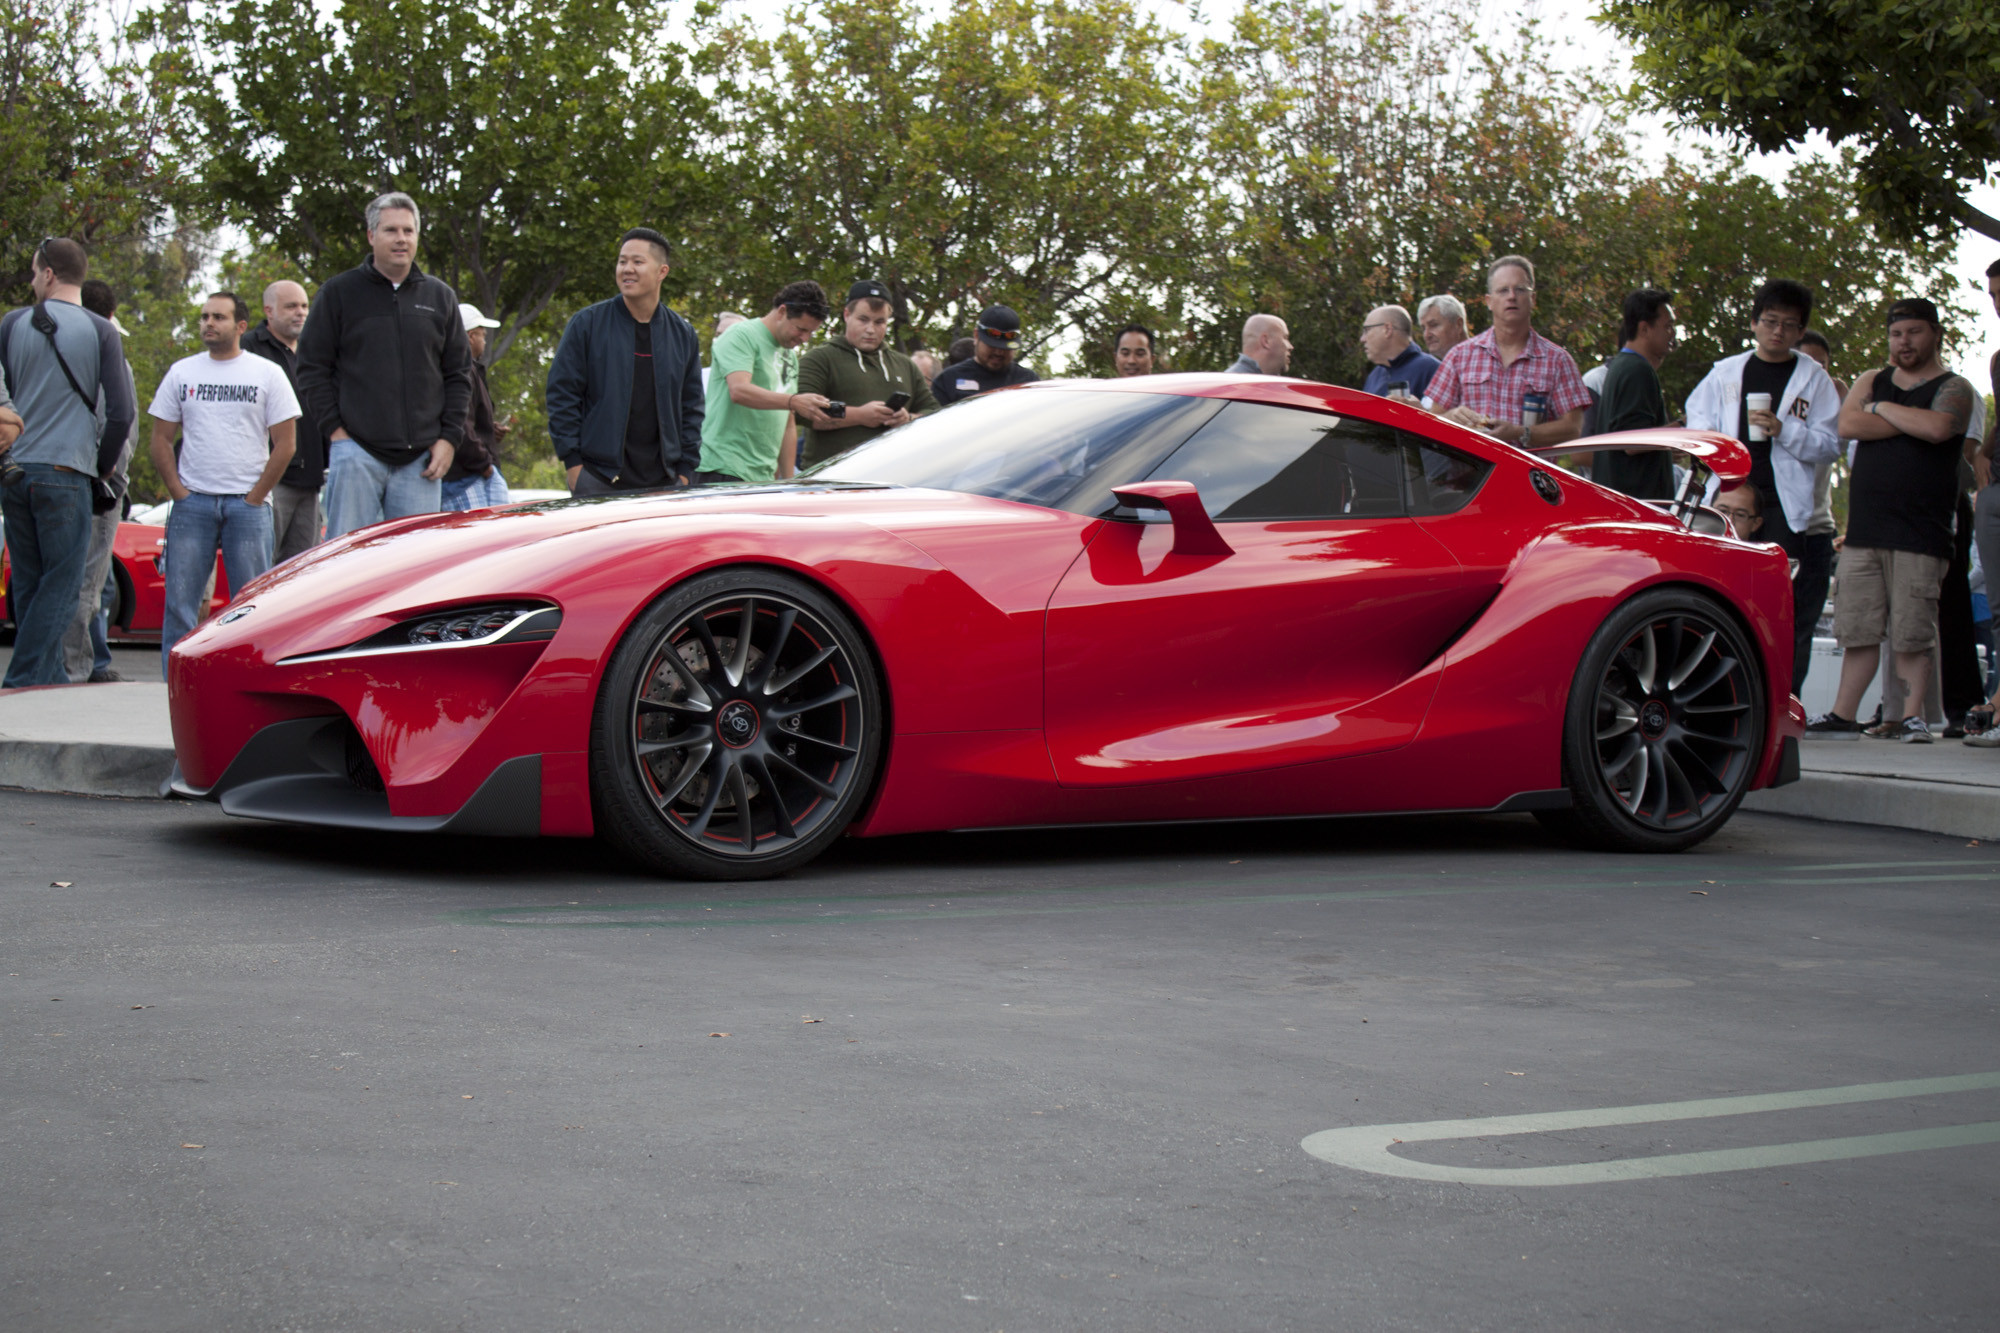 Toyota Toyota FT 1 Supercar Vehicle Car Concept Car Red Car 2000x1333